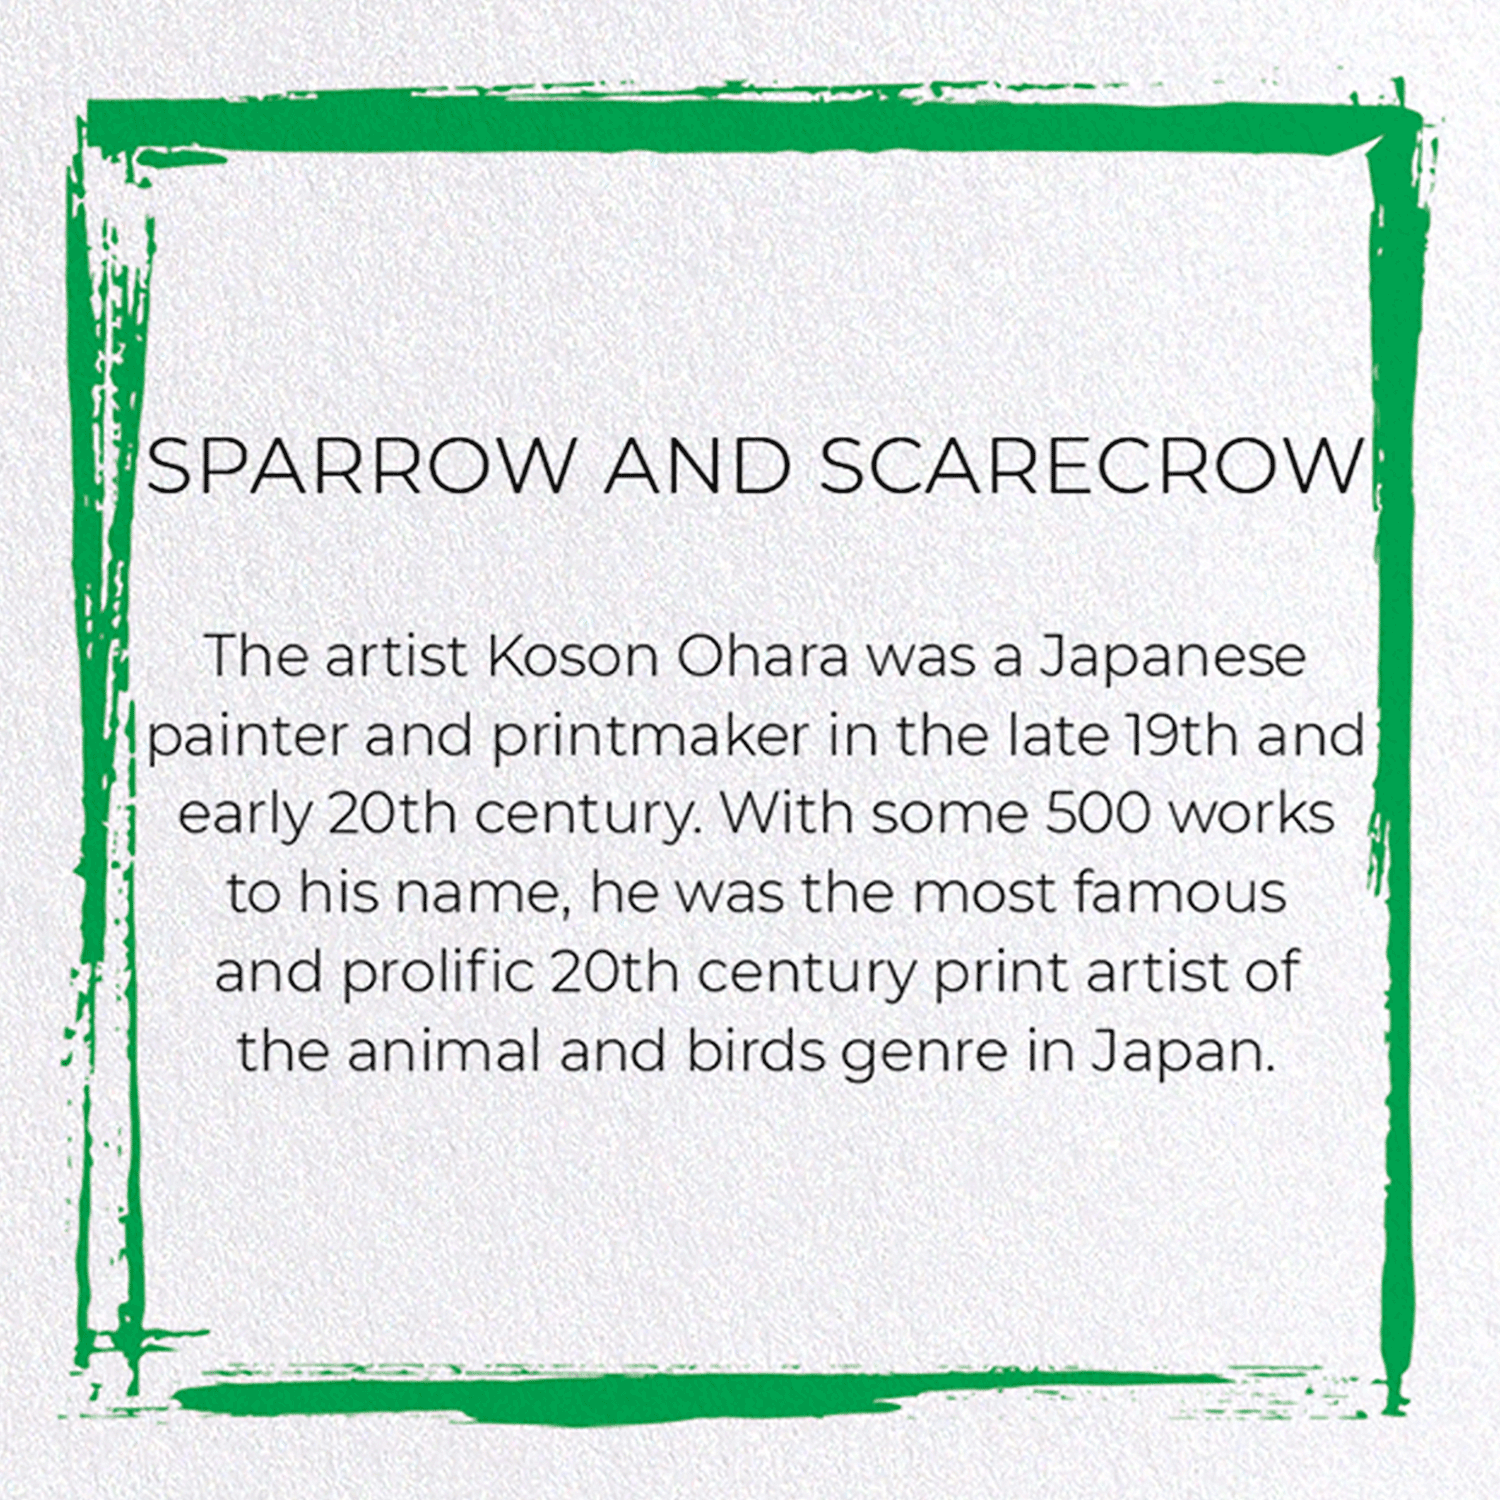 SPARROW AND SCARECROW